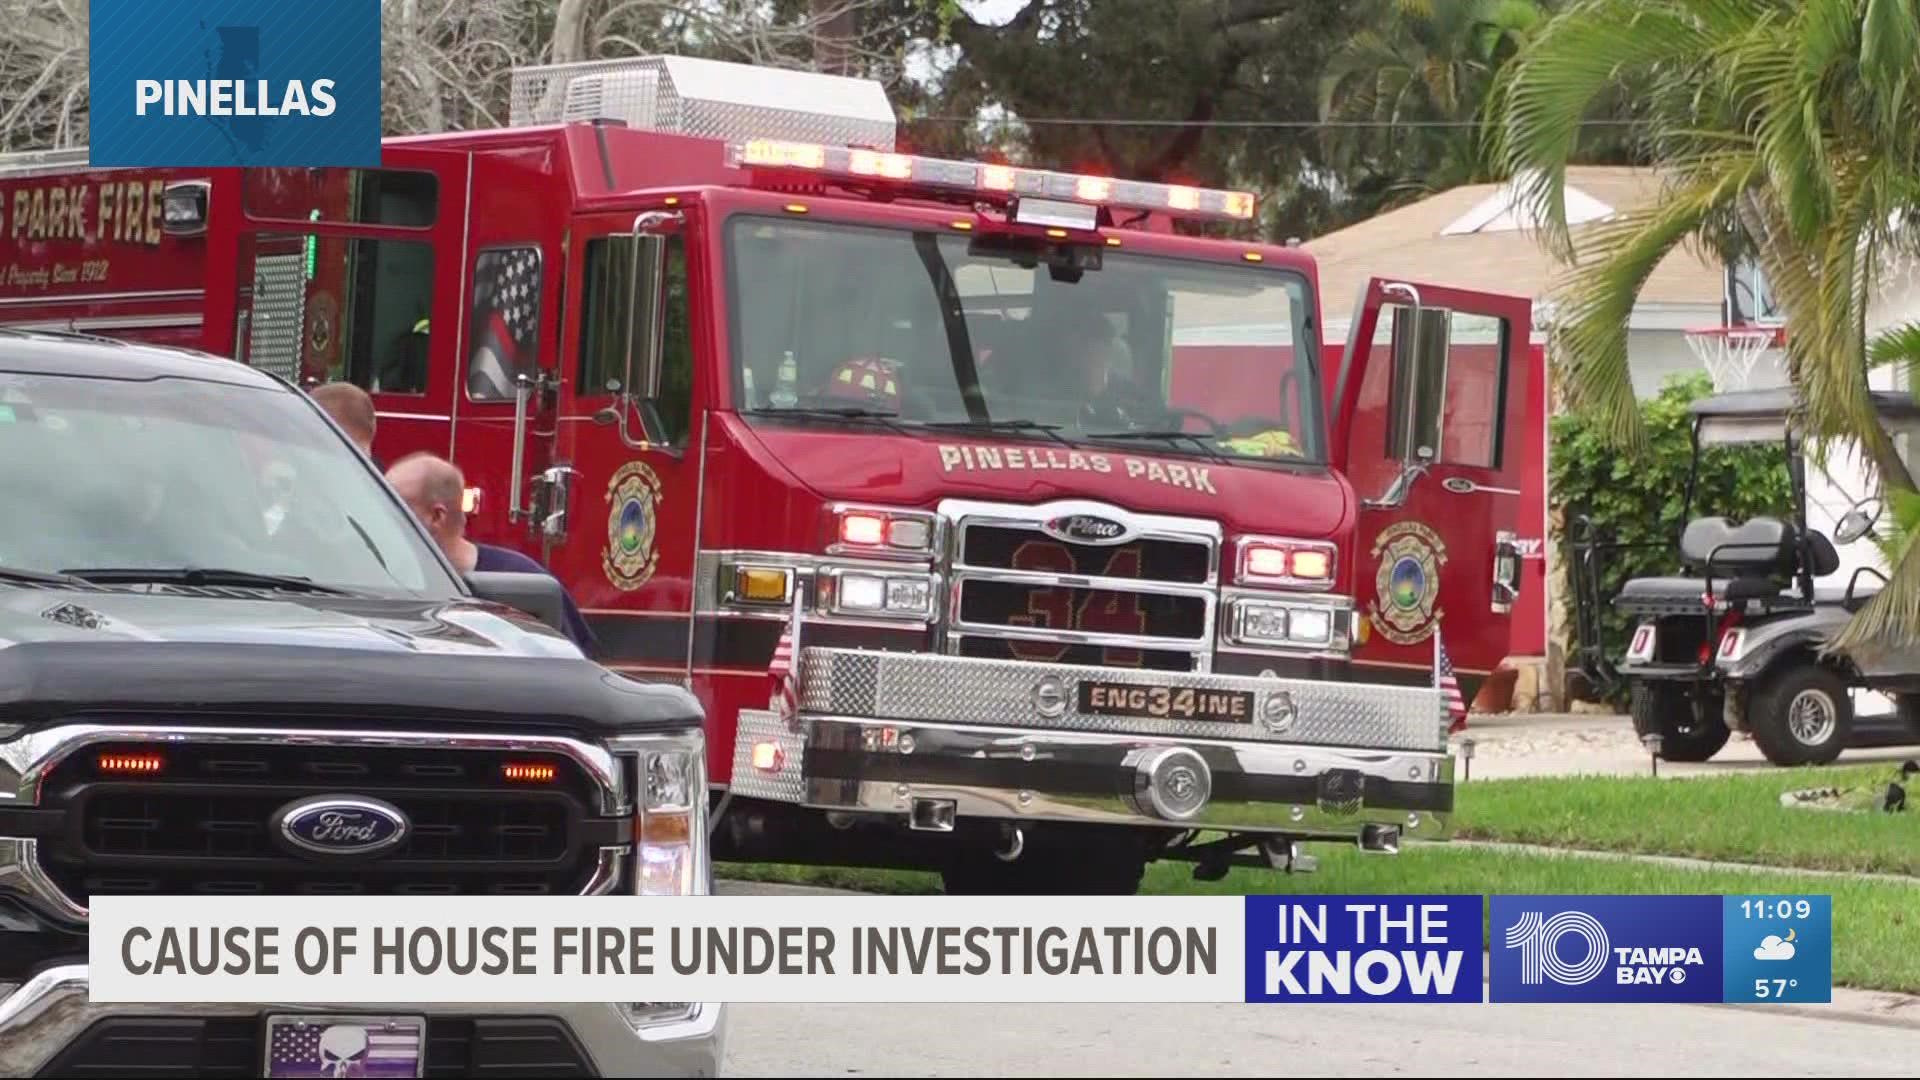 Fire units from Pinellas Park Fire Department and Largo Fire Rescue were called out around 10 a.m.